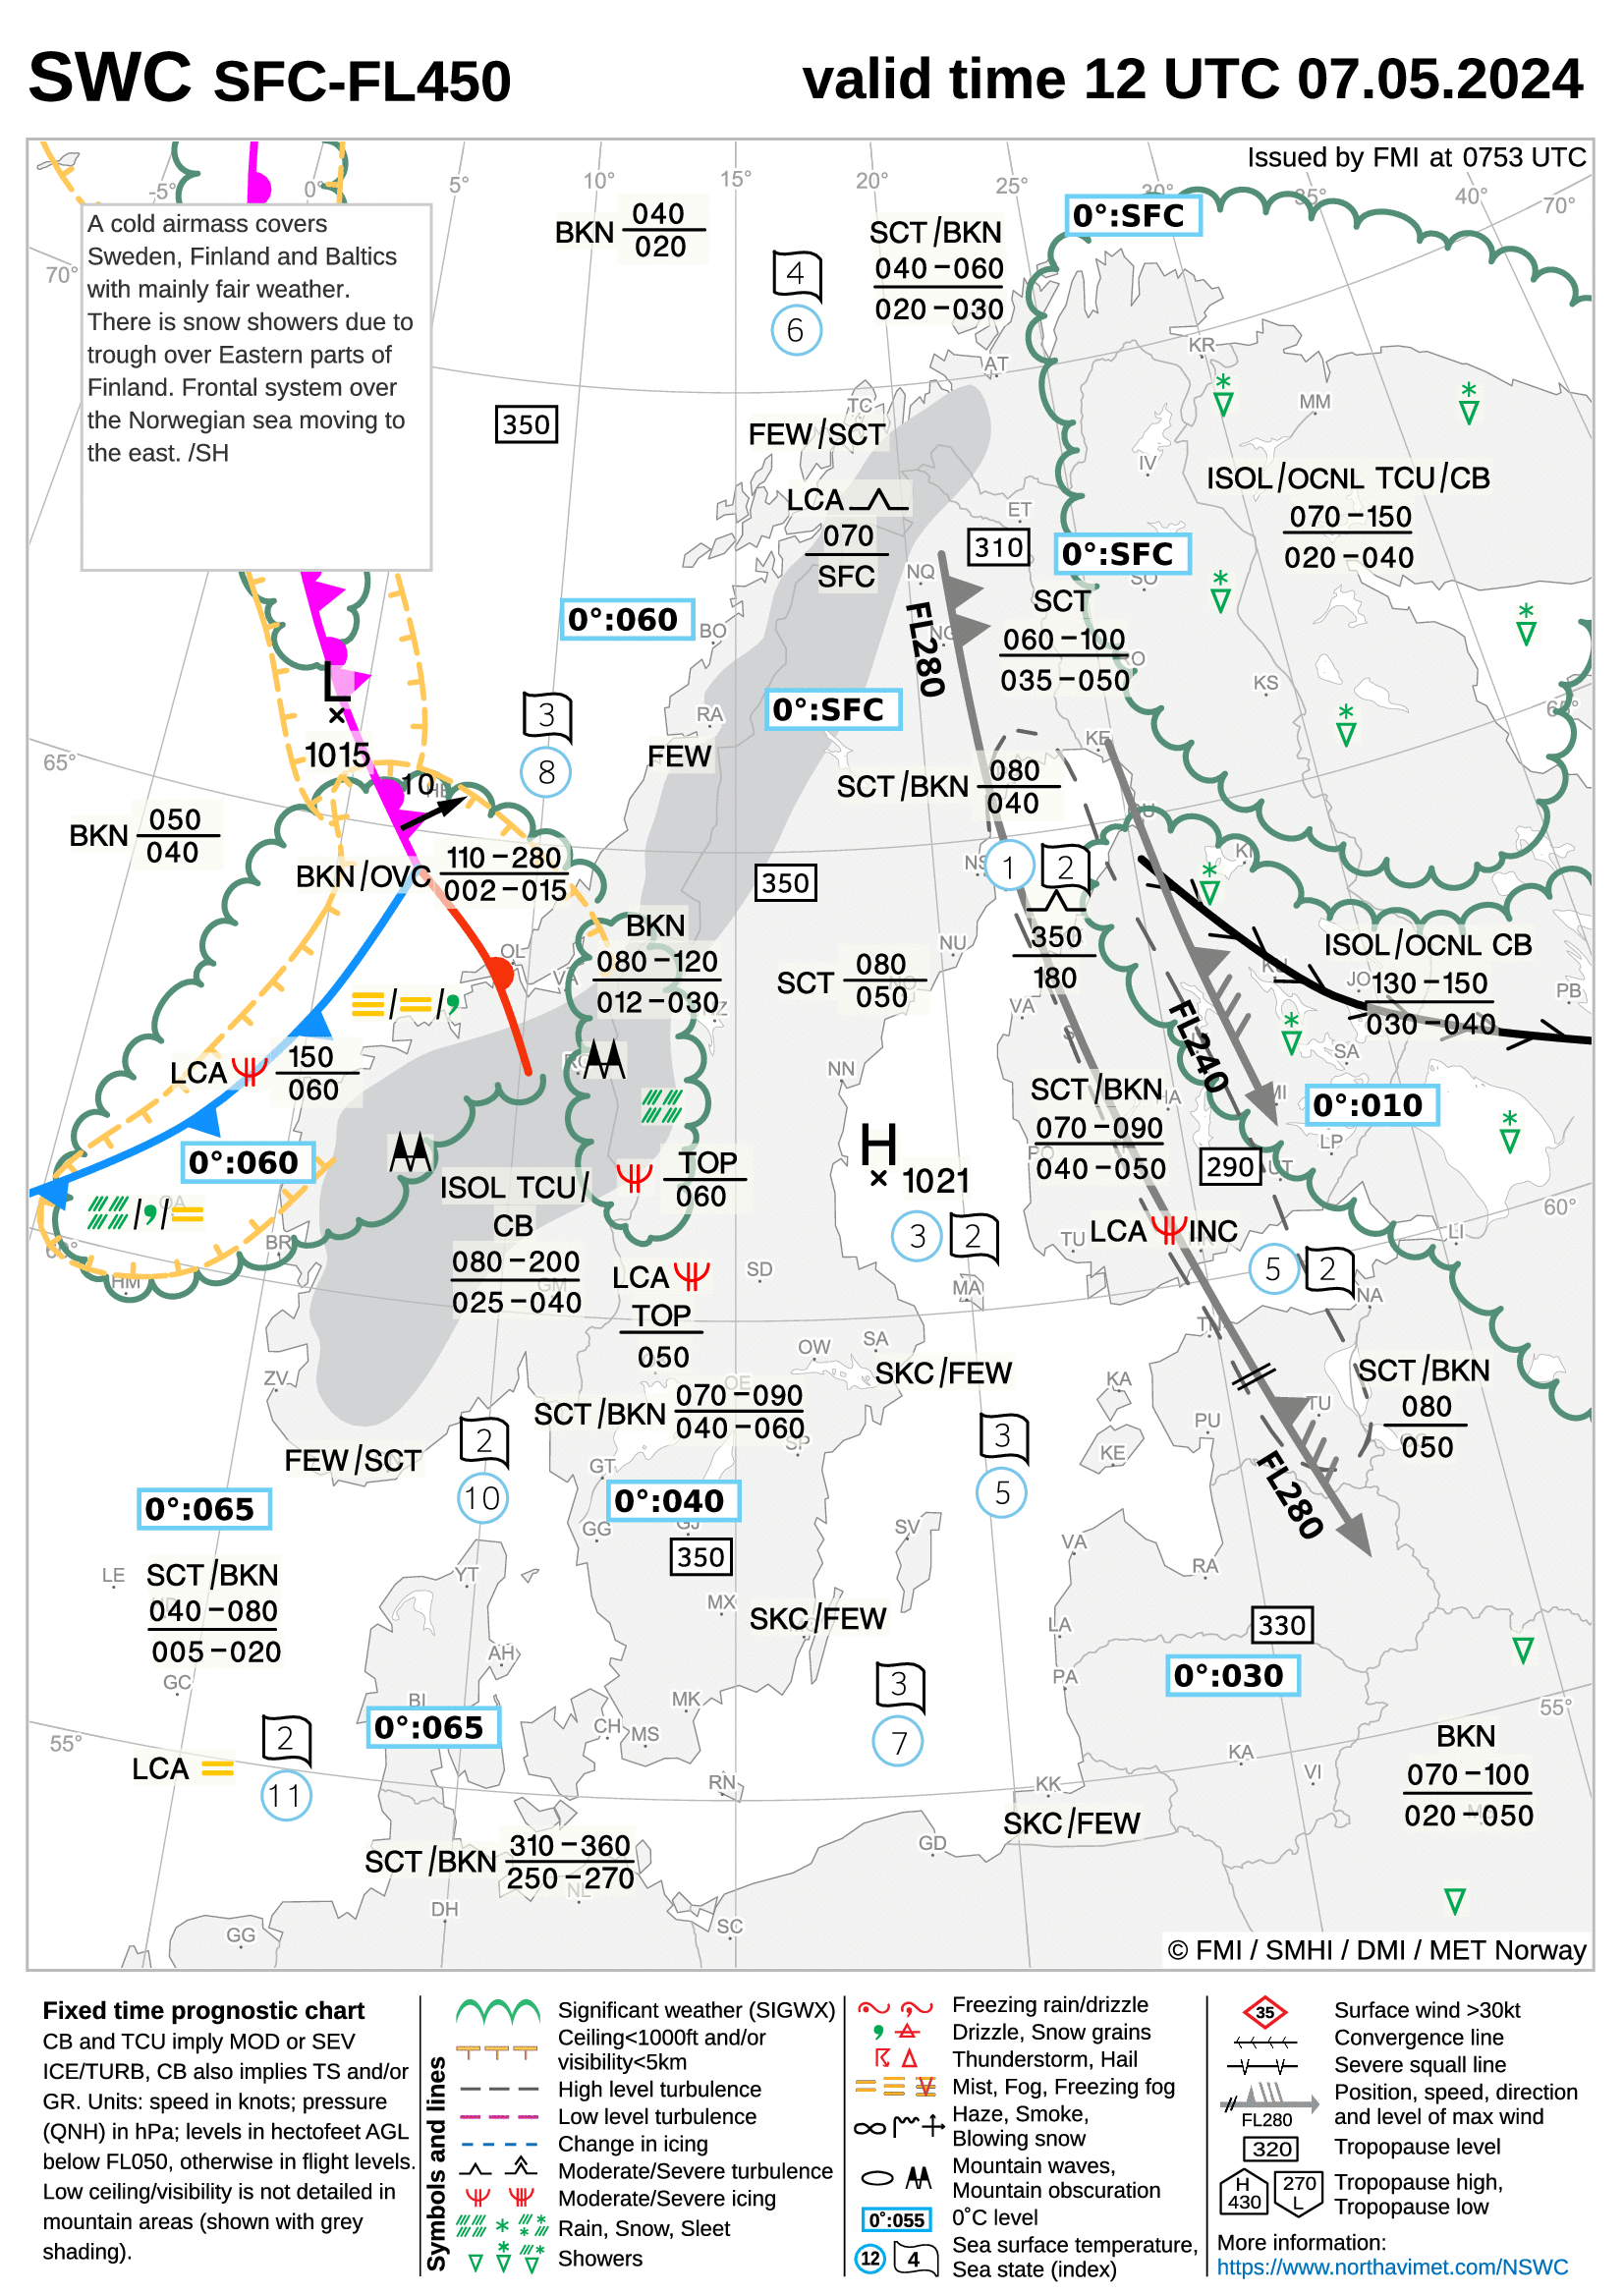 Significant Weather Chart for Scandinavia